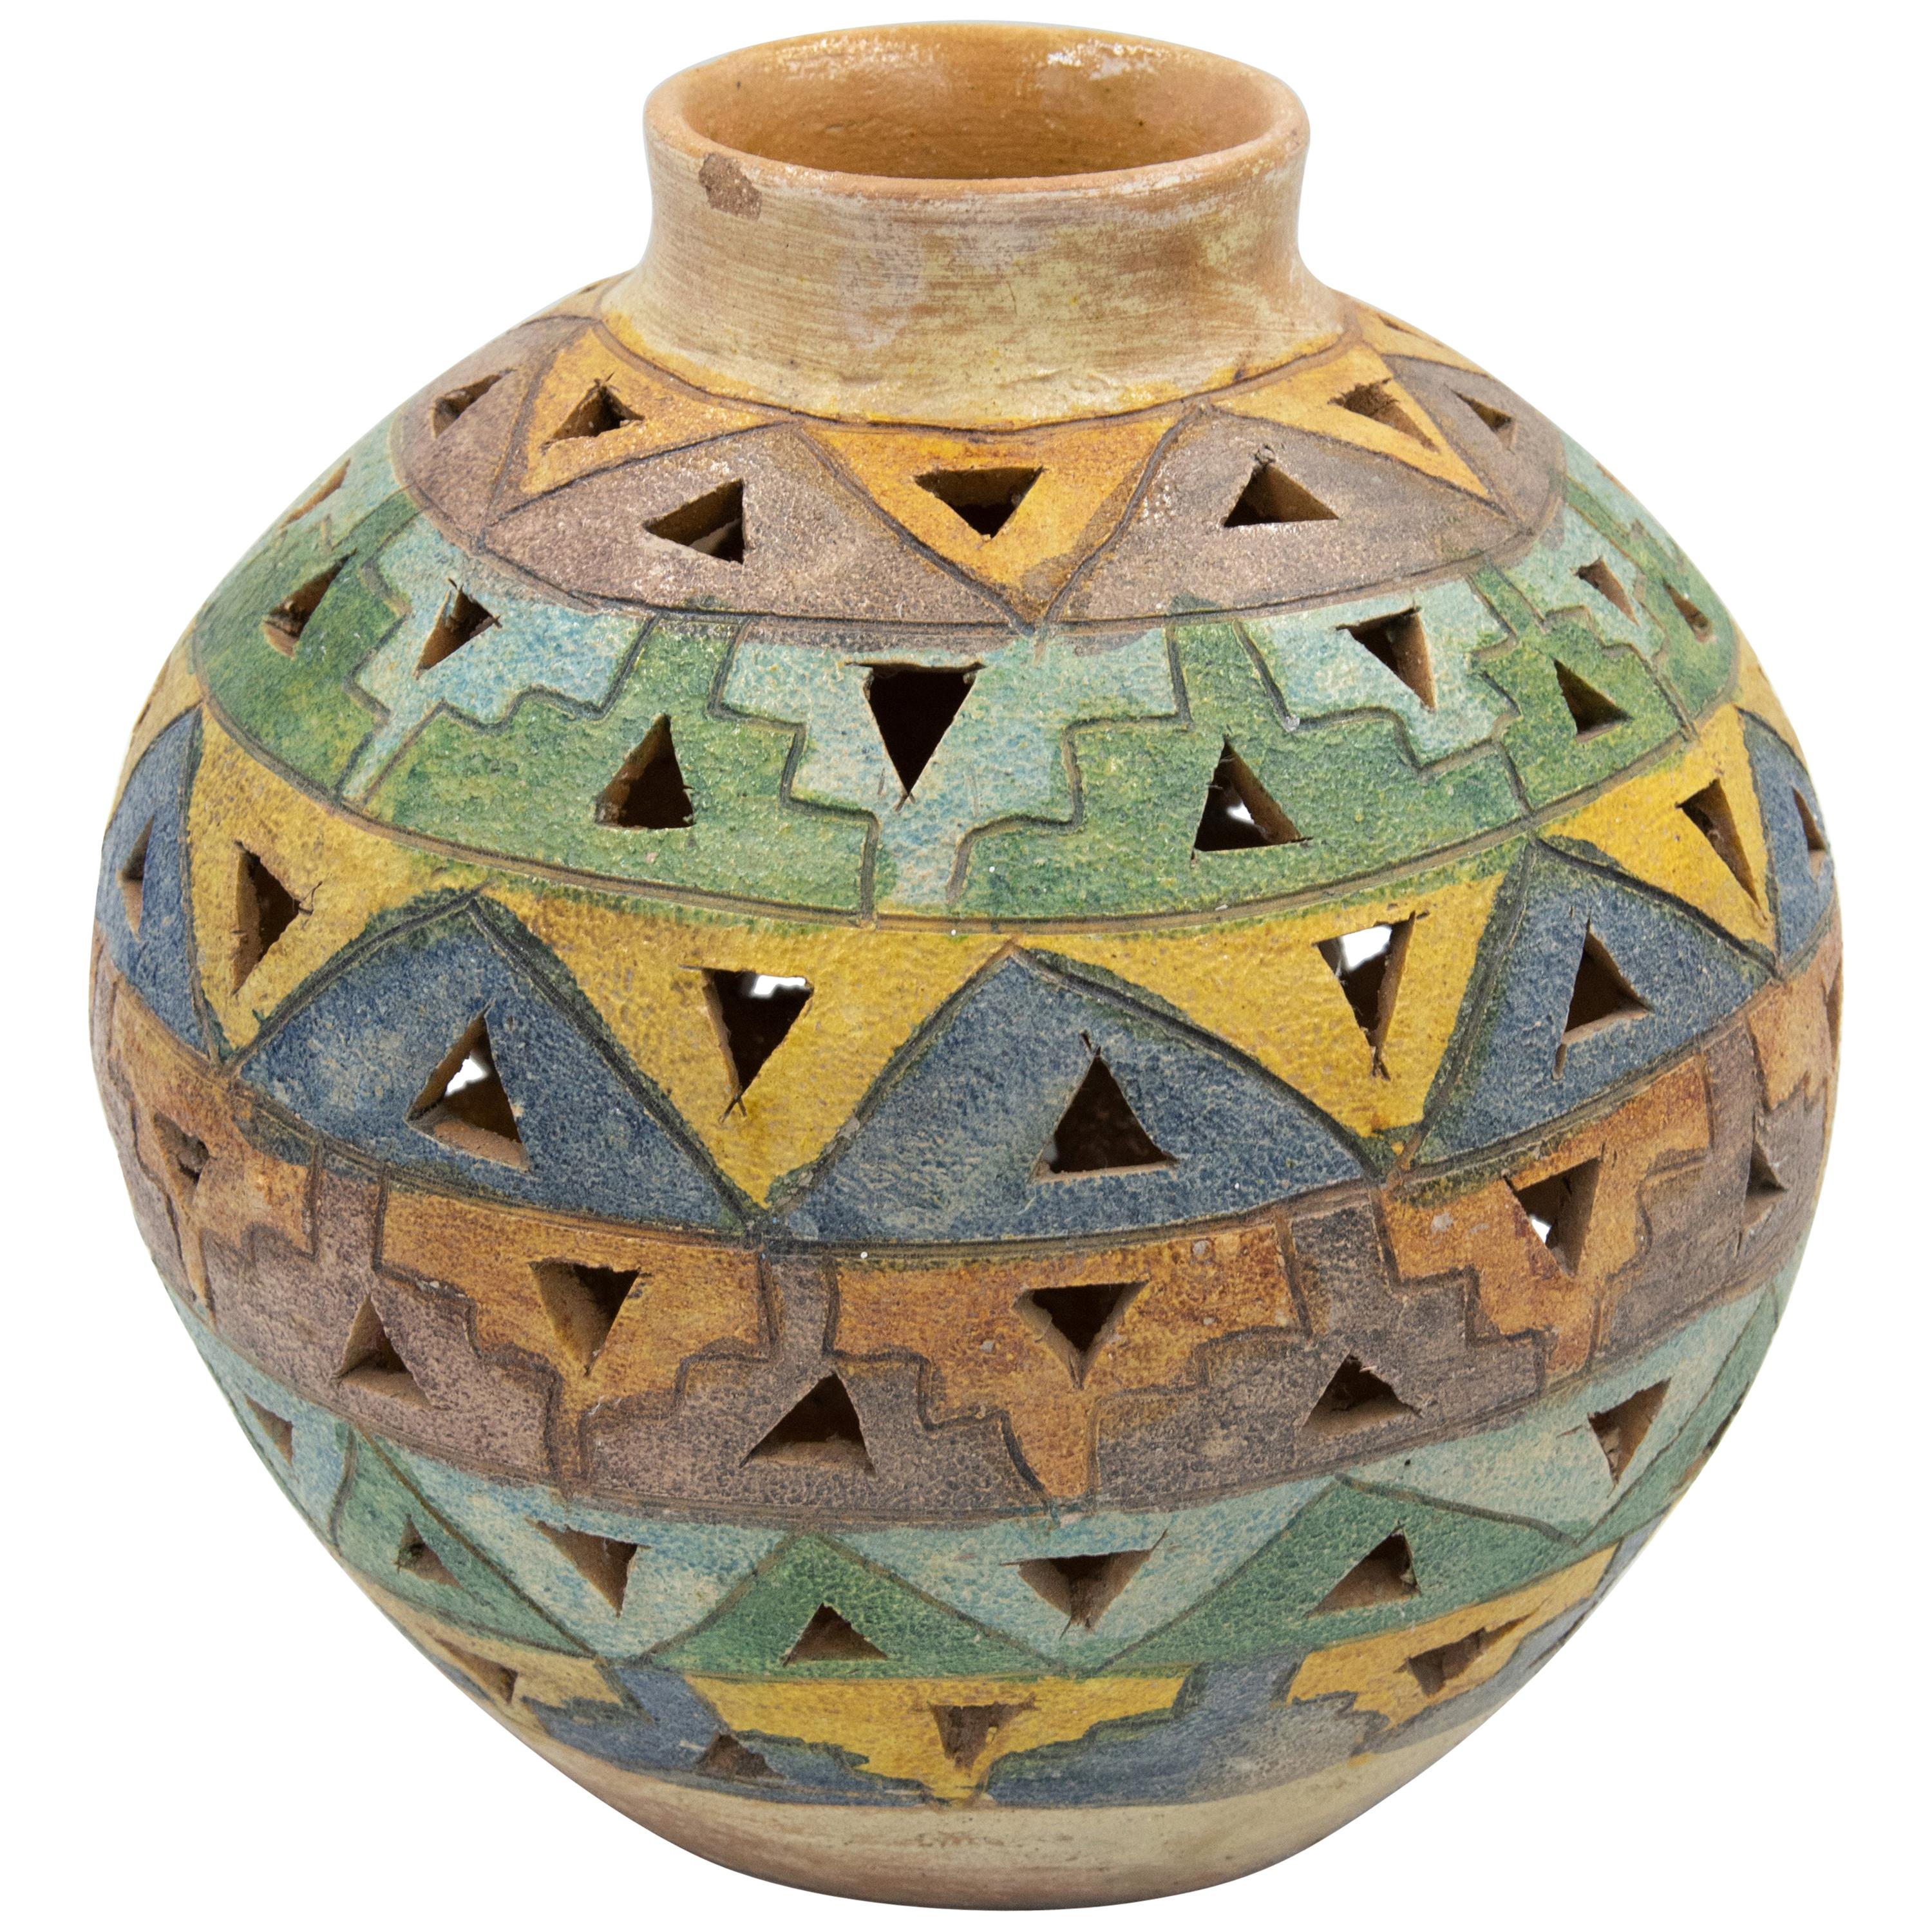 Dolores Porras Mexican Antique Rustic Geometric Vase Clay Made in Oaxaca, 1998